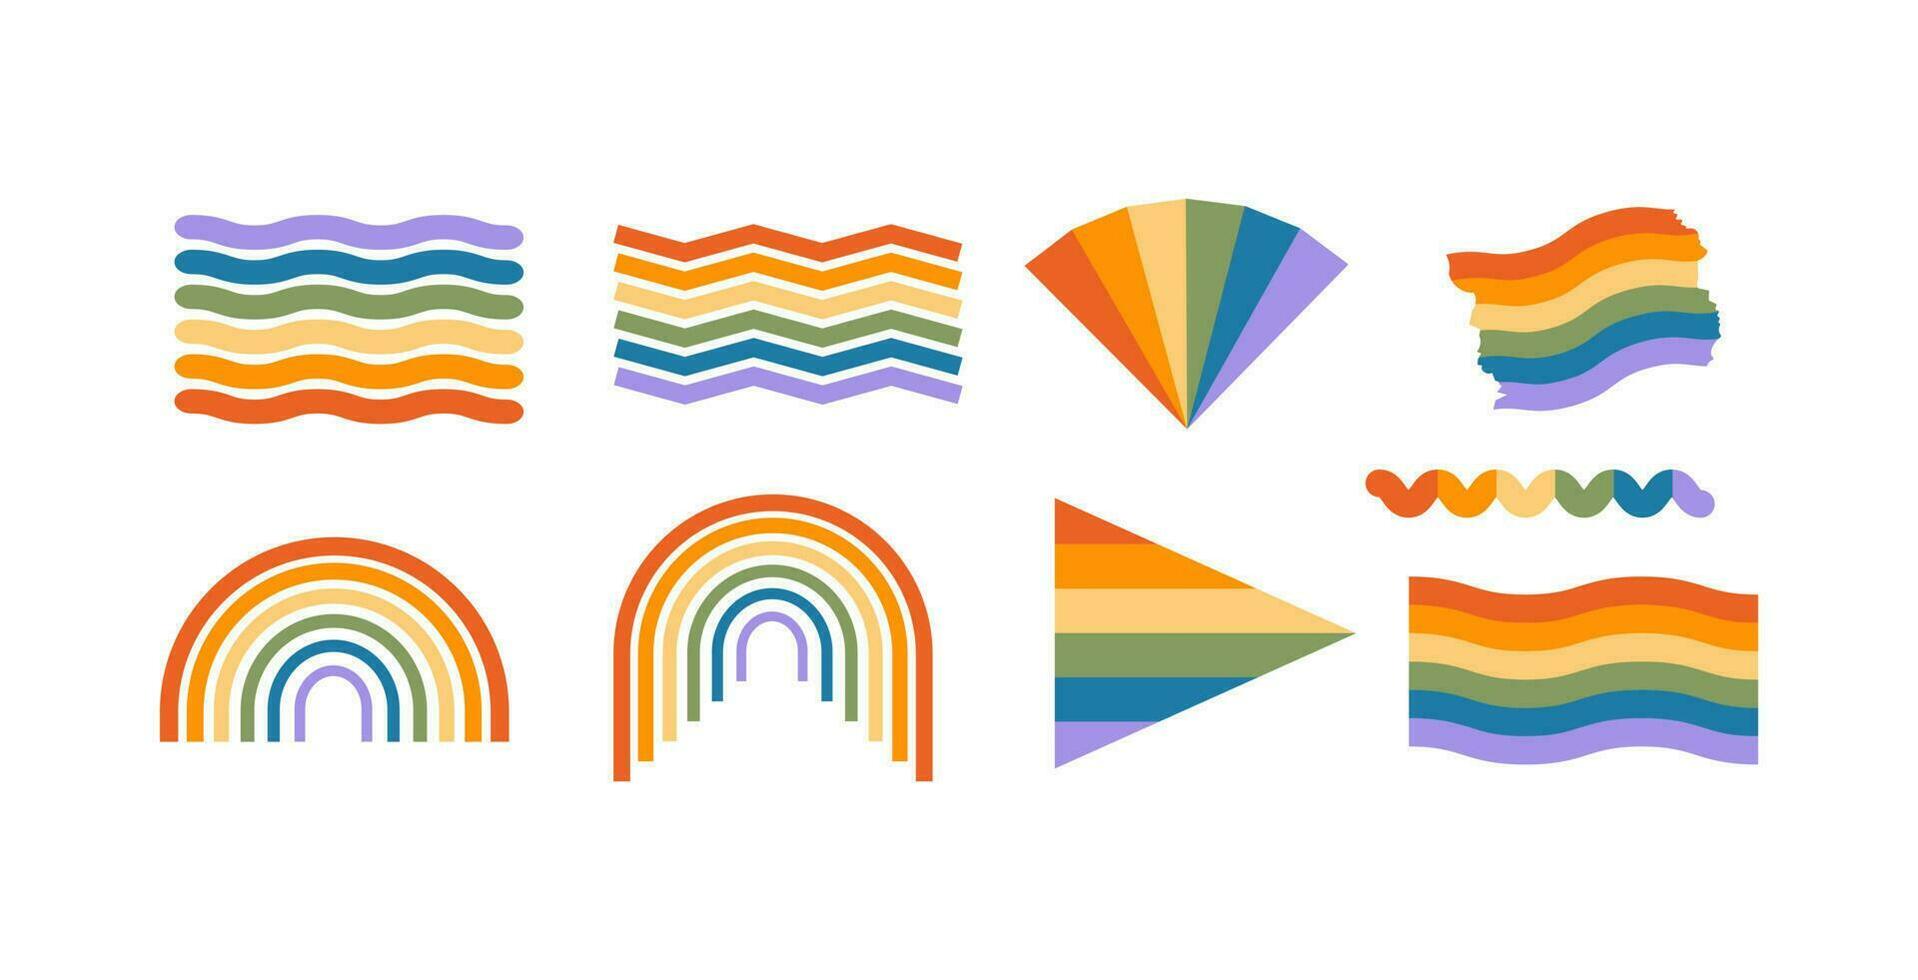 Colorful lgbtq creative element set. Collection of lgbt rainbow symbol for pride month vector illustration